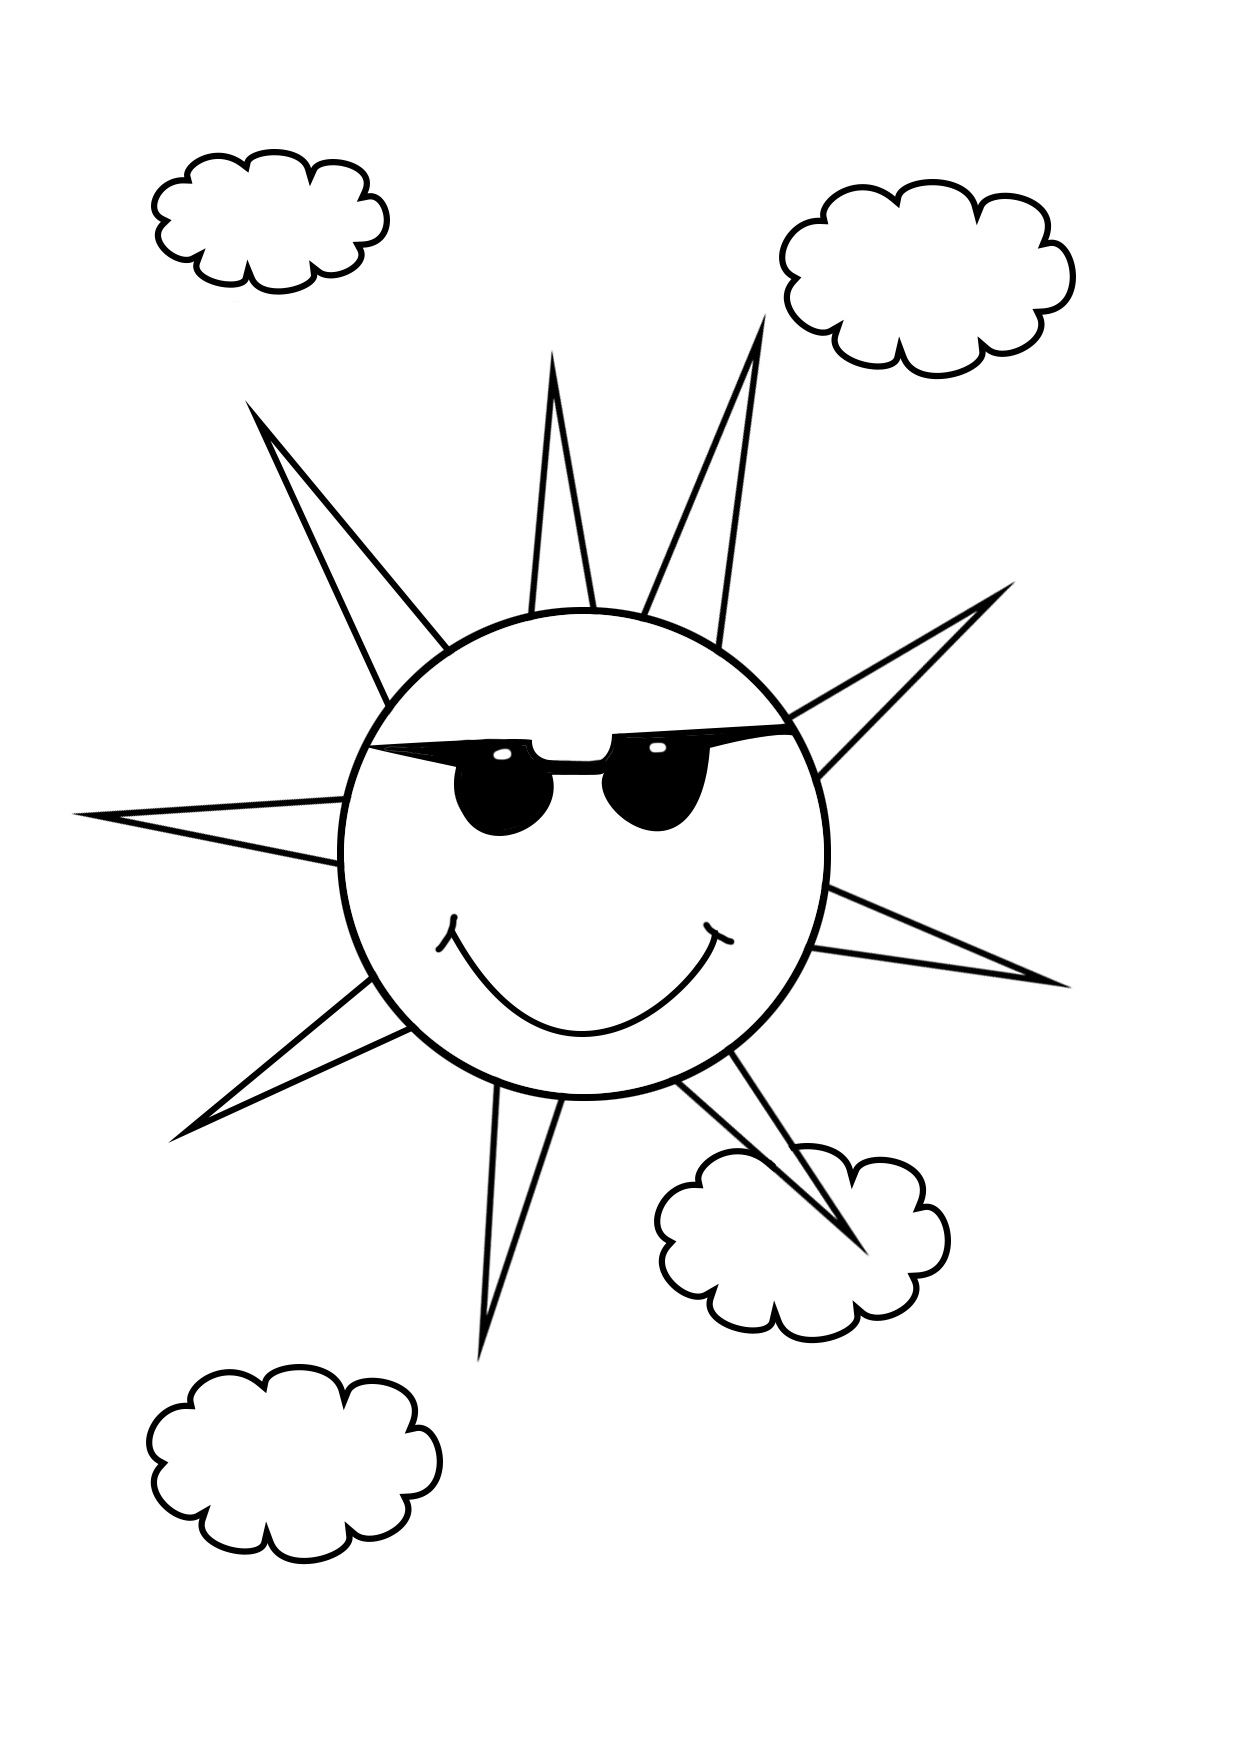 Sun Image Coloring Page Coloring Pages